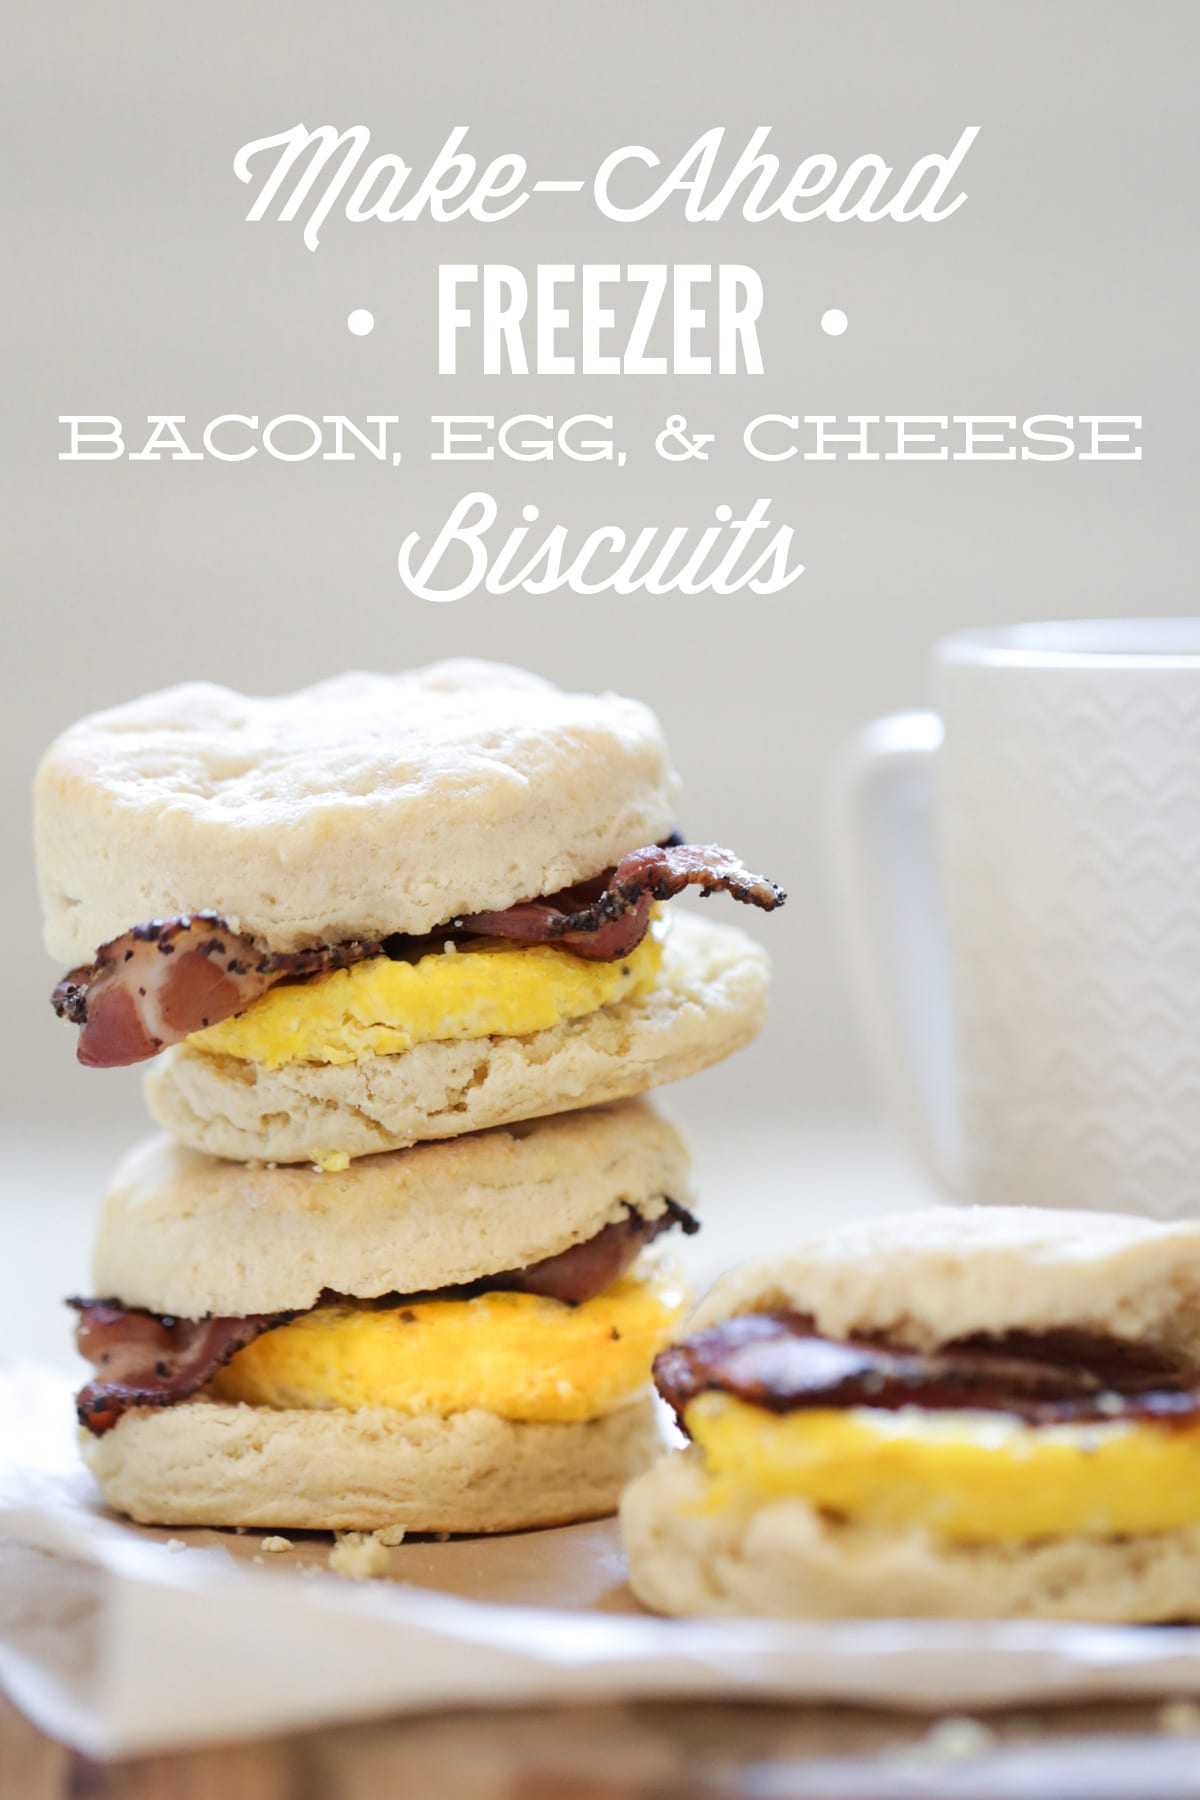 Make-Ahead Freezer Bacon, Egg, and Cheese Biscuits